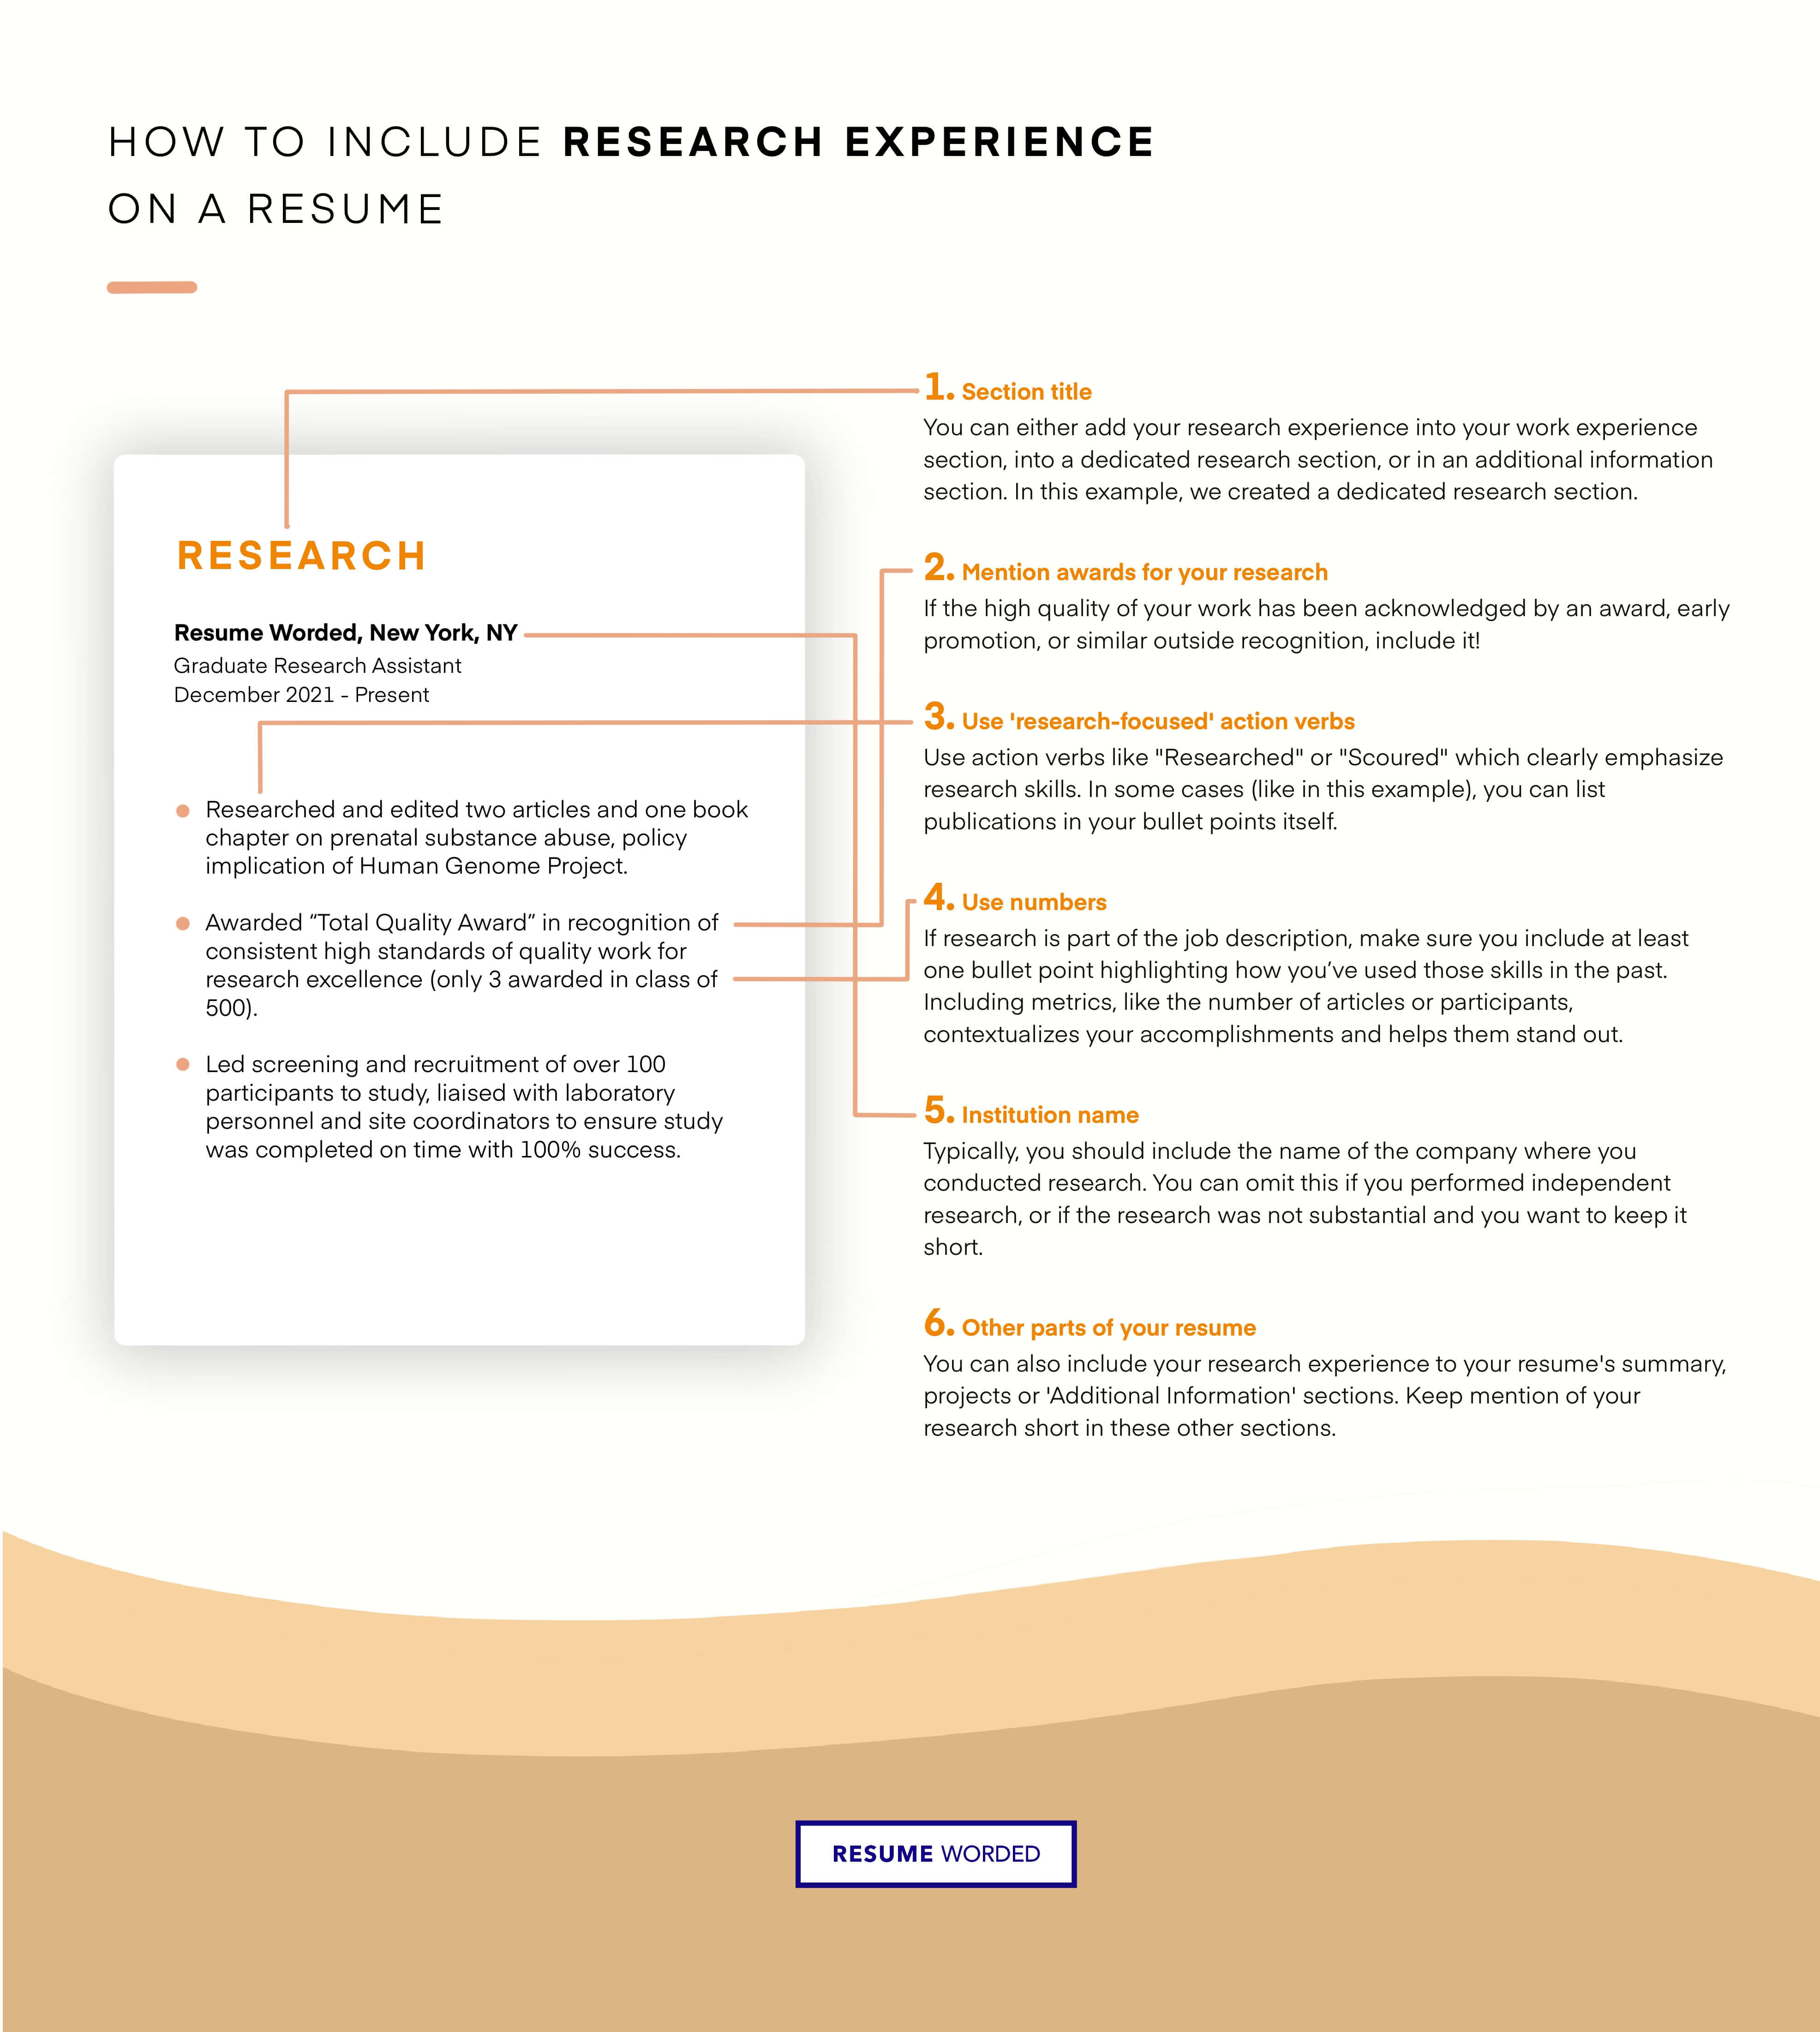 Include UX research projects you’ve worked on independently. - Entry-Level UX Researcher Resume